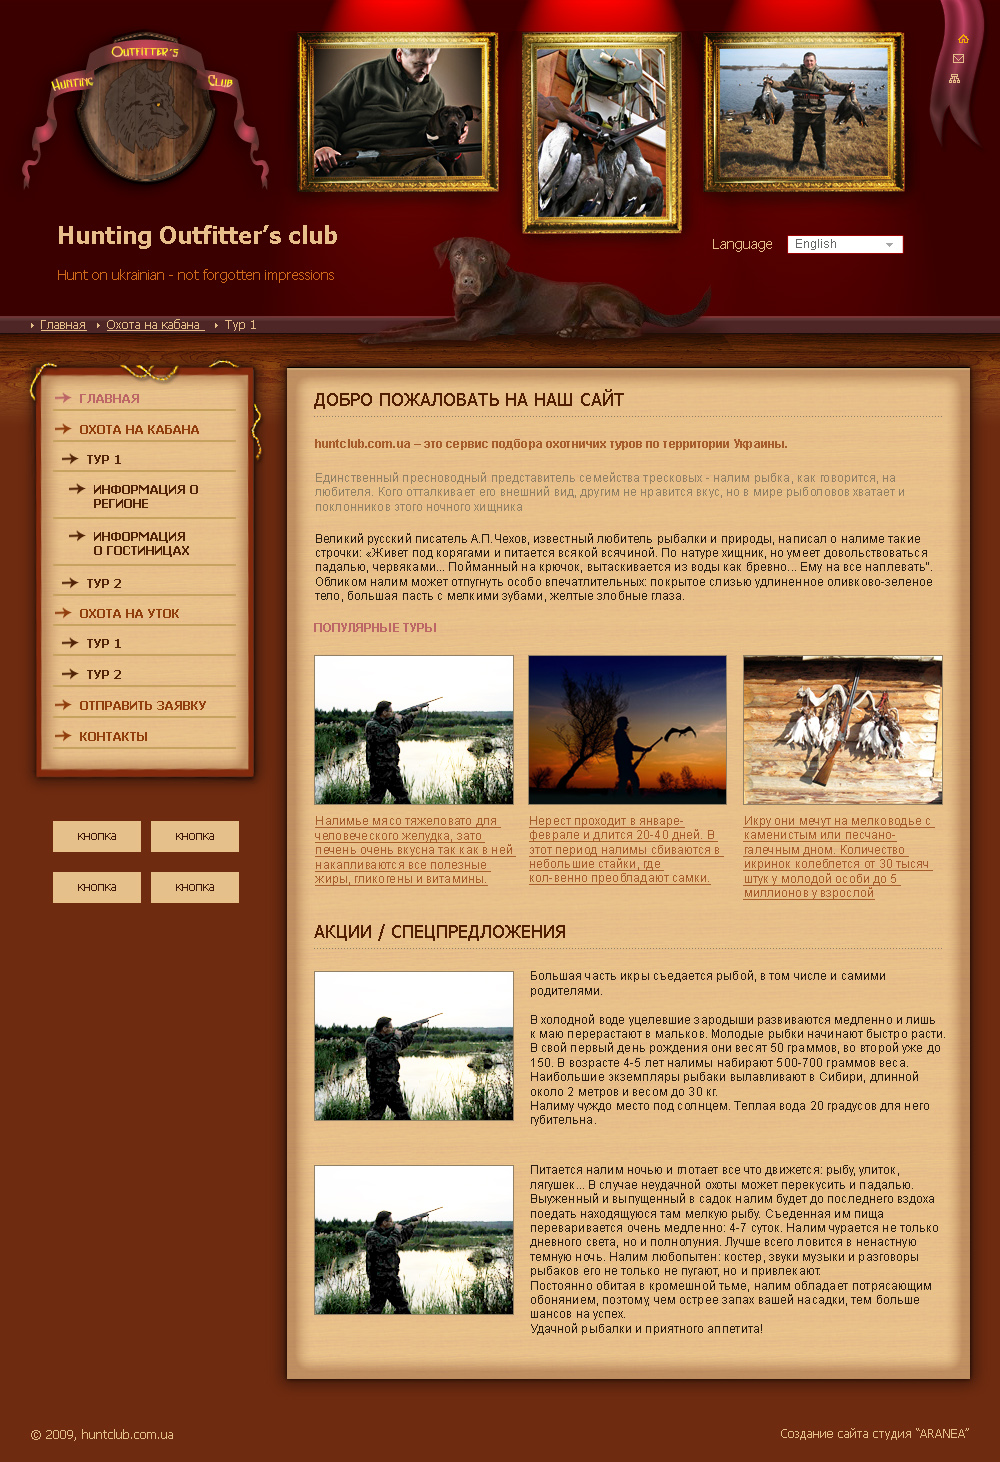 Сайт &quot; Hunting Outfitter’s club&quot;